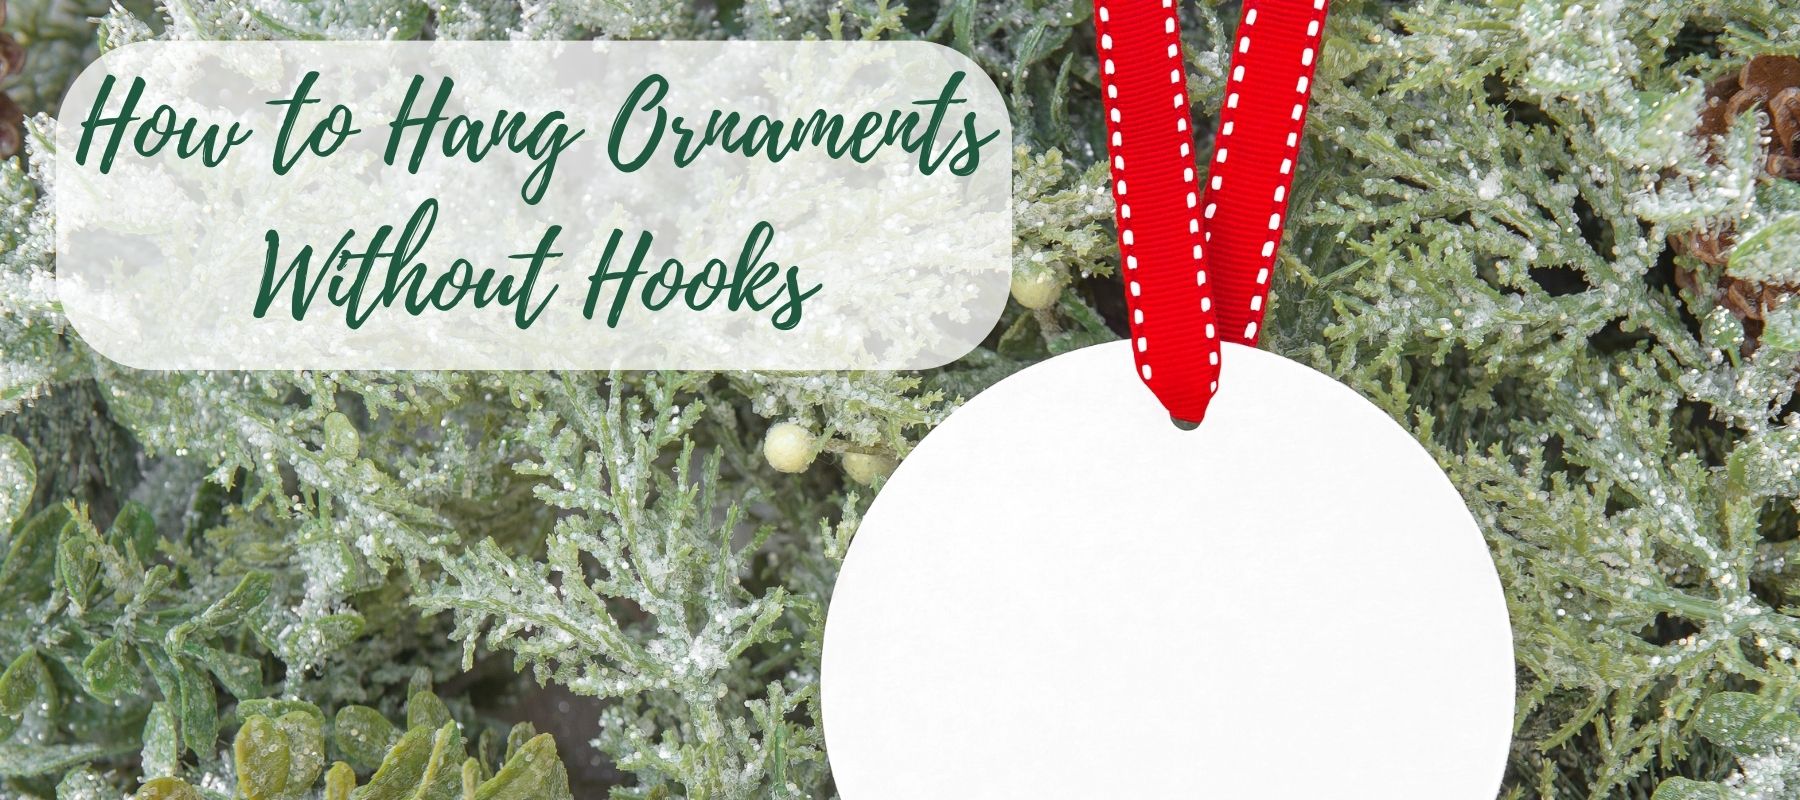 How-to-hang-ornaments-without-hook